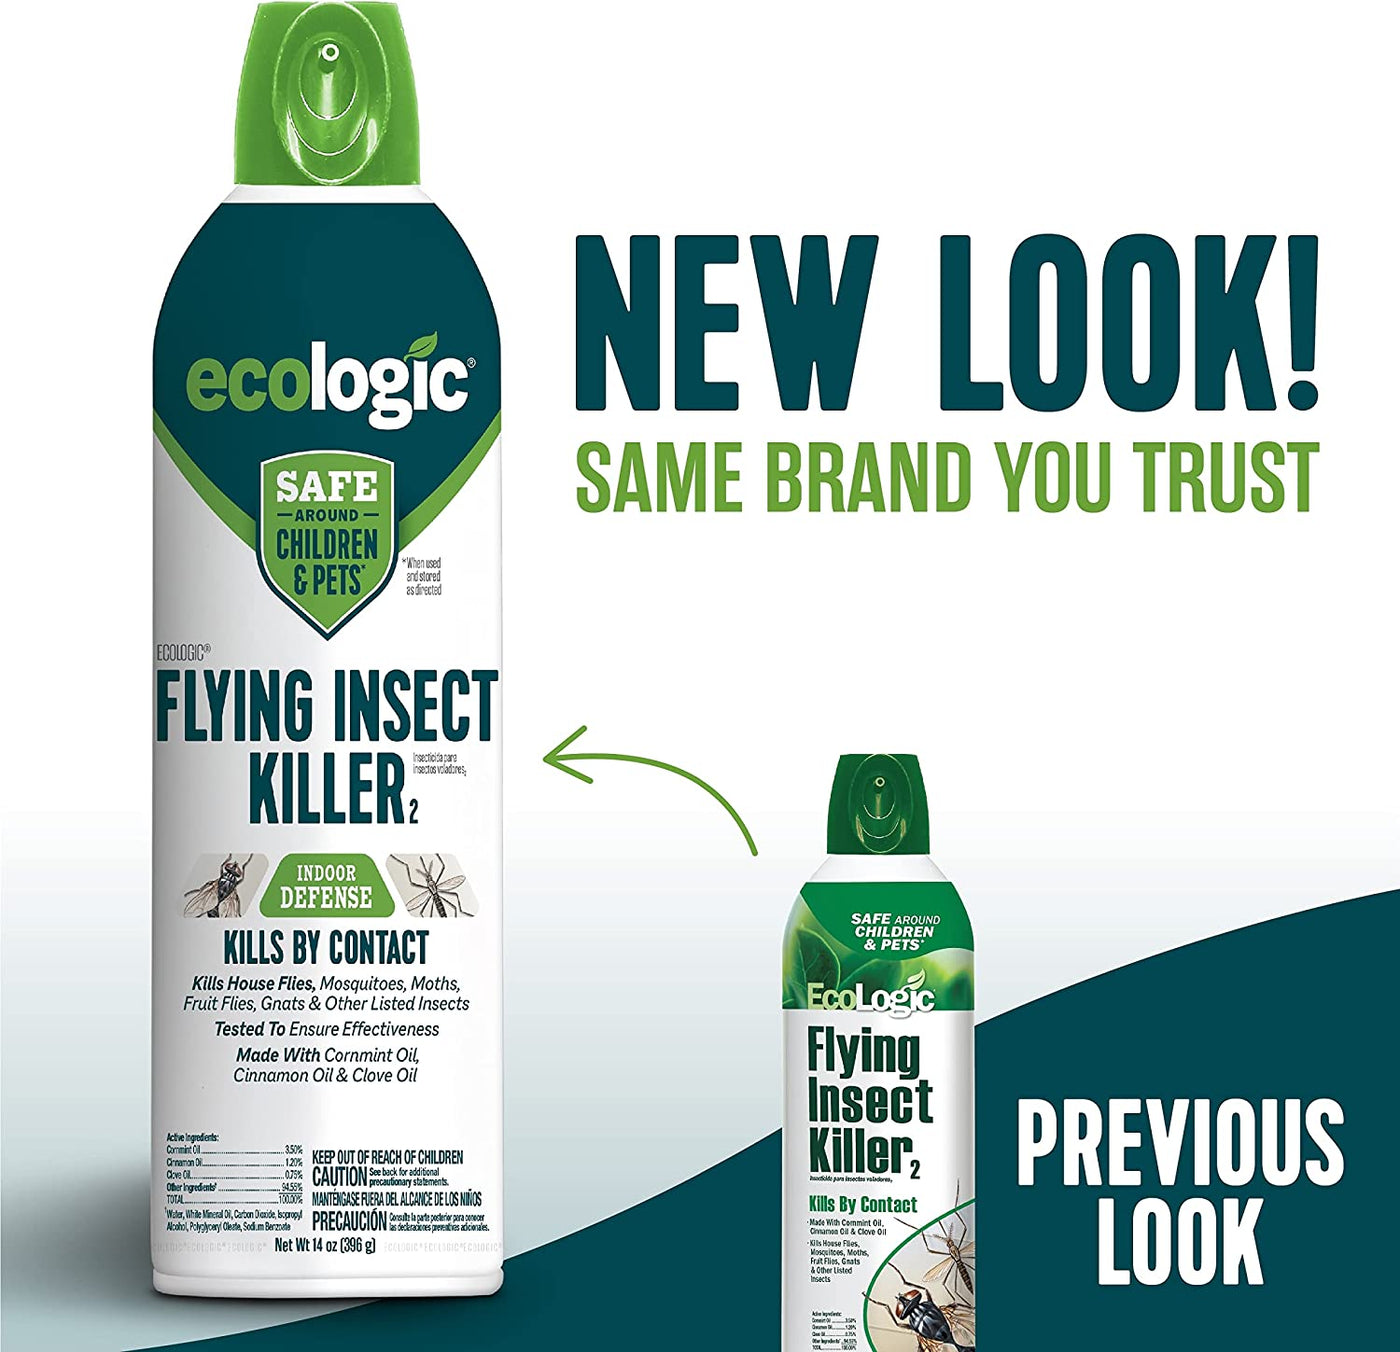 Ecologic Flying Insect Killer, Kills Fruit Flies, Mosquitos, Gnats and Other Insects, (Aerosol Spray) 14 fl Ounce